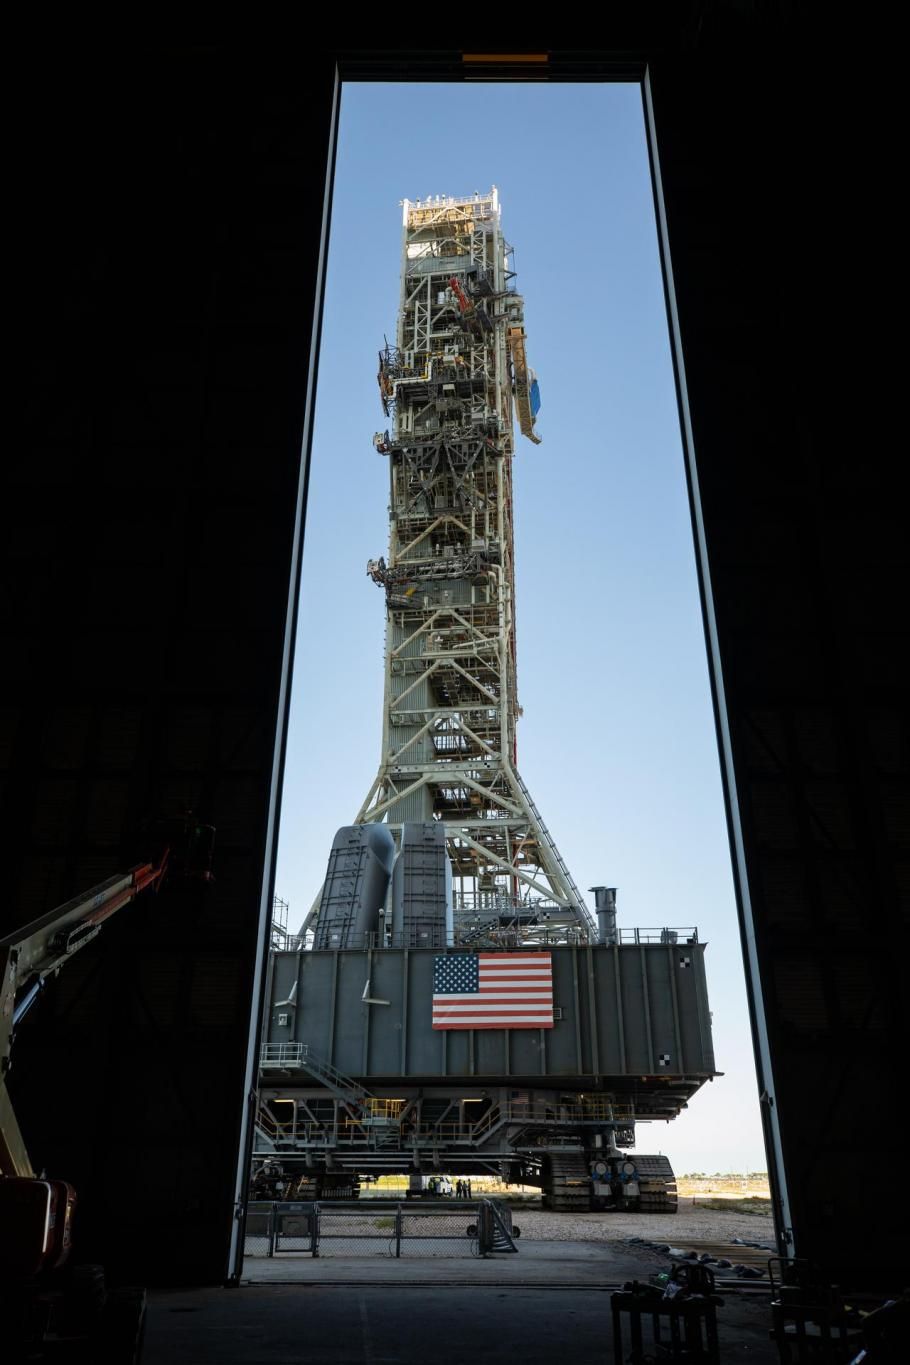 A mobile launcher seen through doors. An American flag is displayed beneath it.